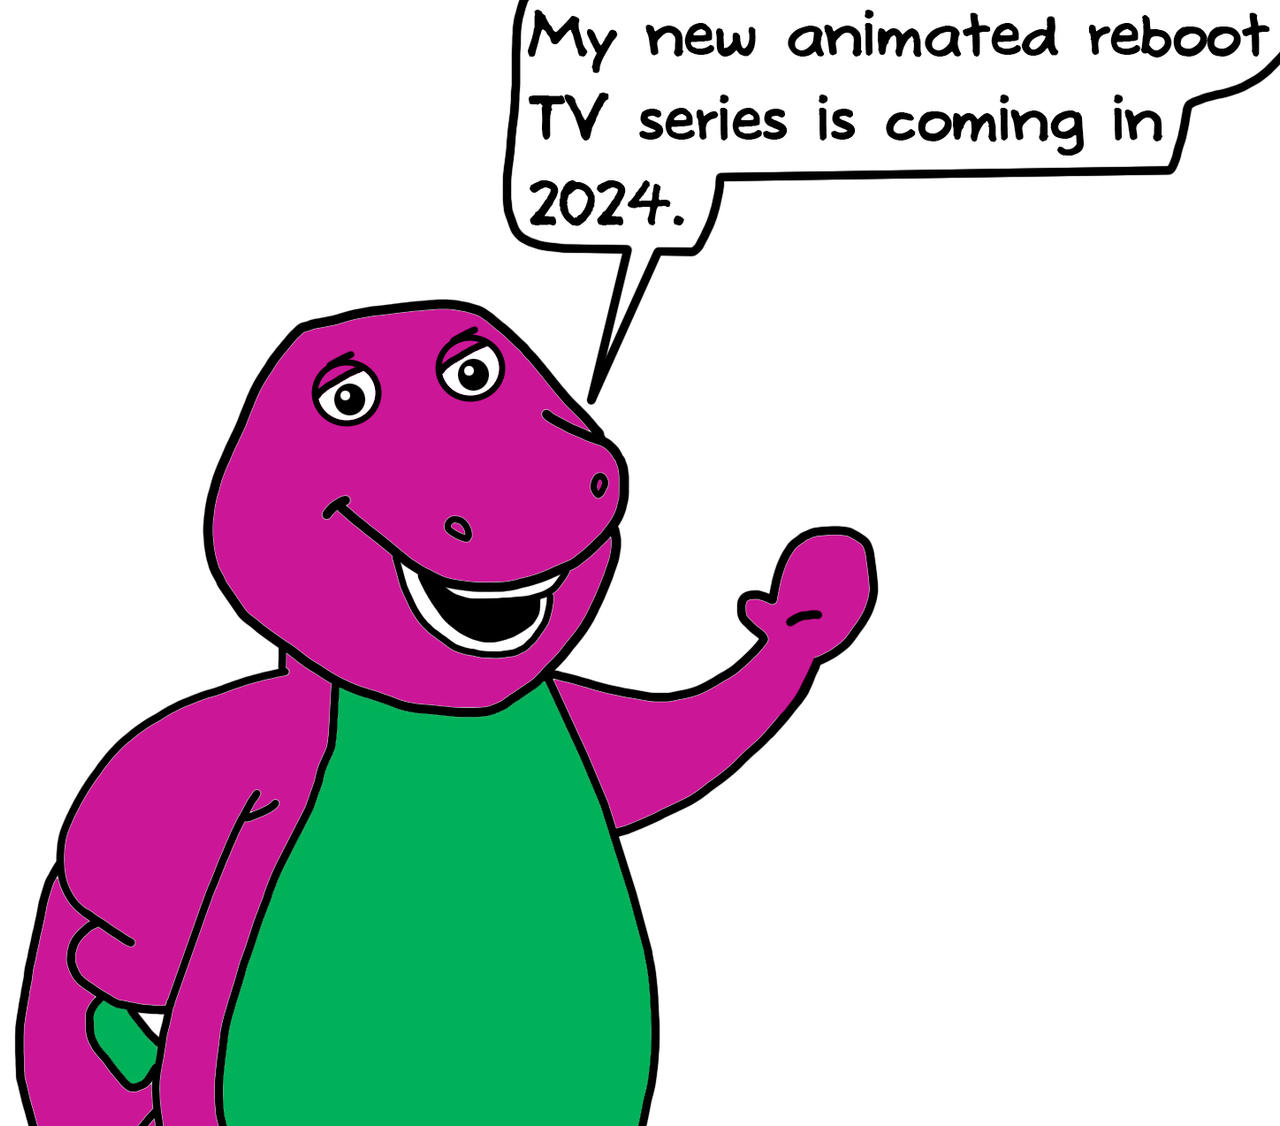 New Barney animated reboot series coming in 2024 by NicholasVinhChauLe